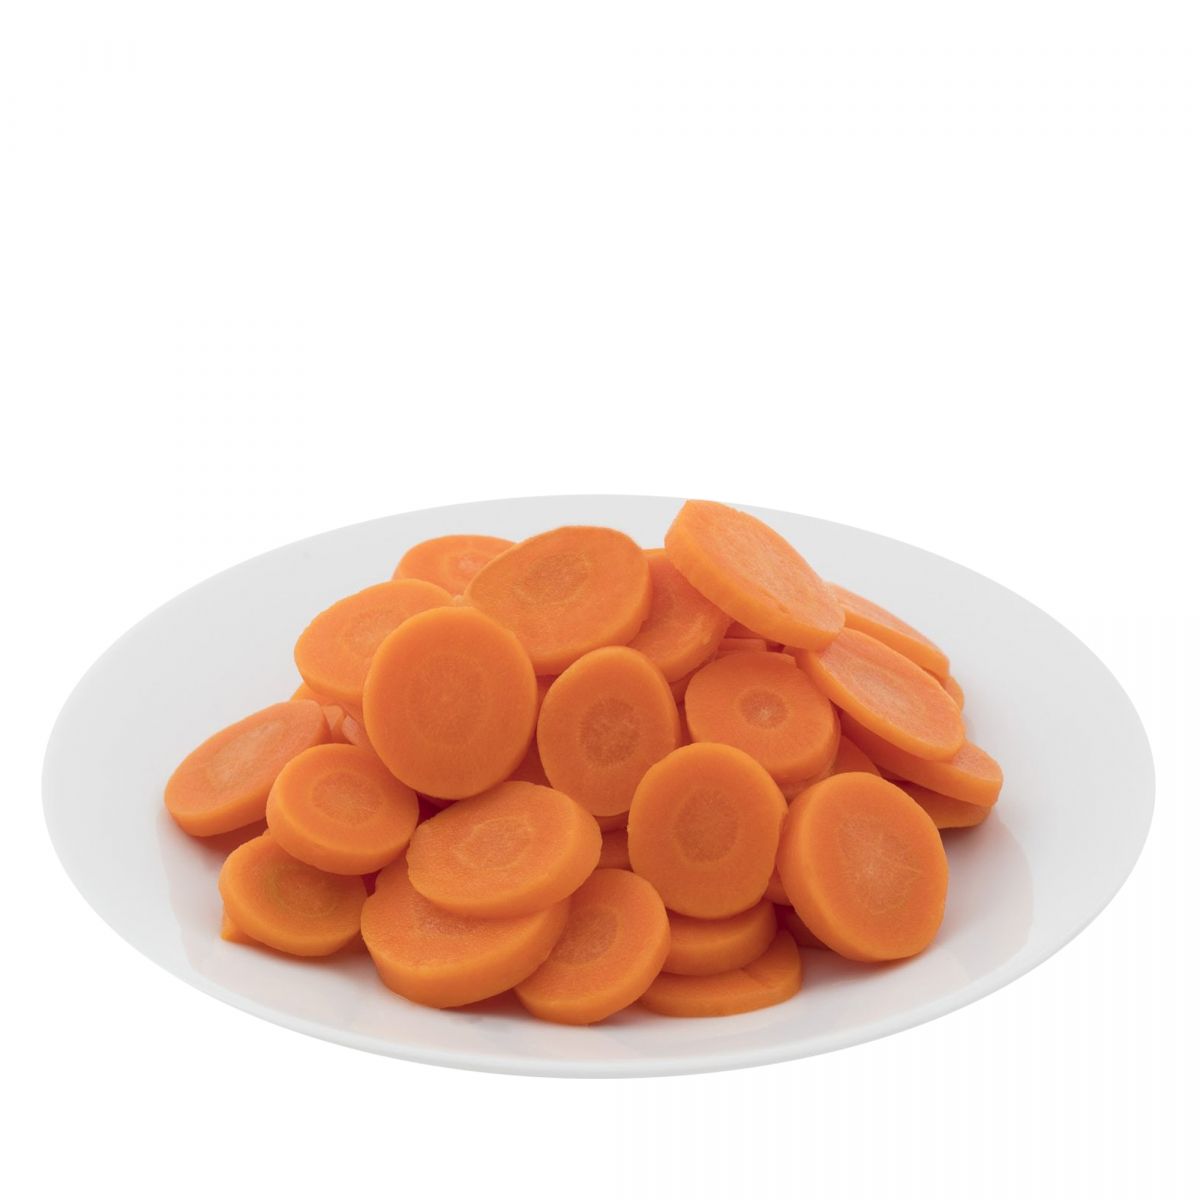 https://lavifood.com/en/products/blanching/carrot